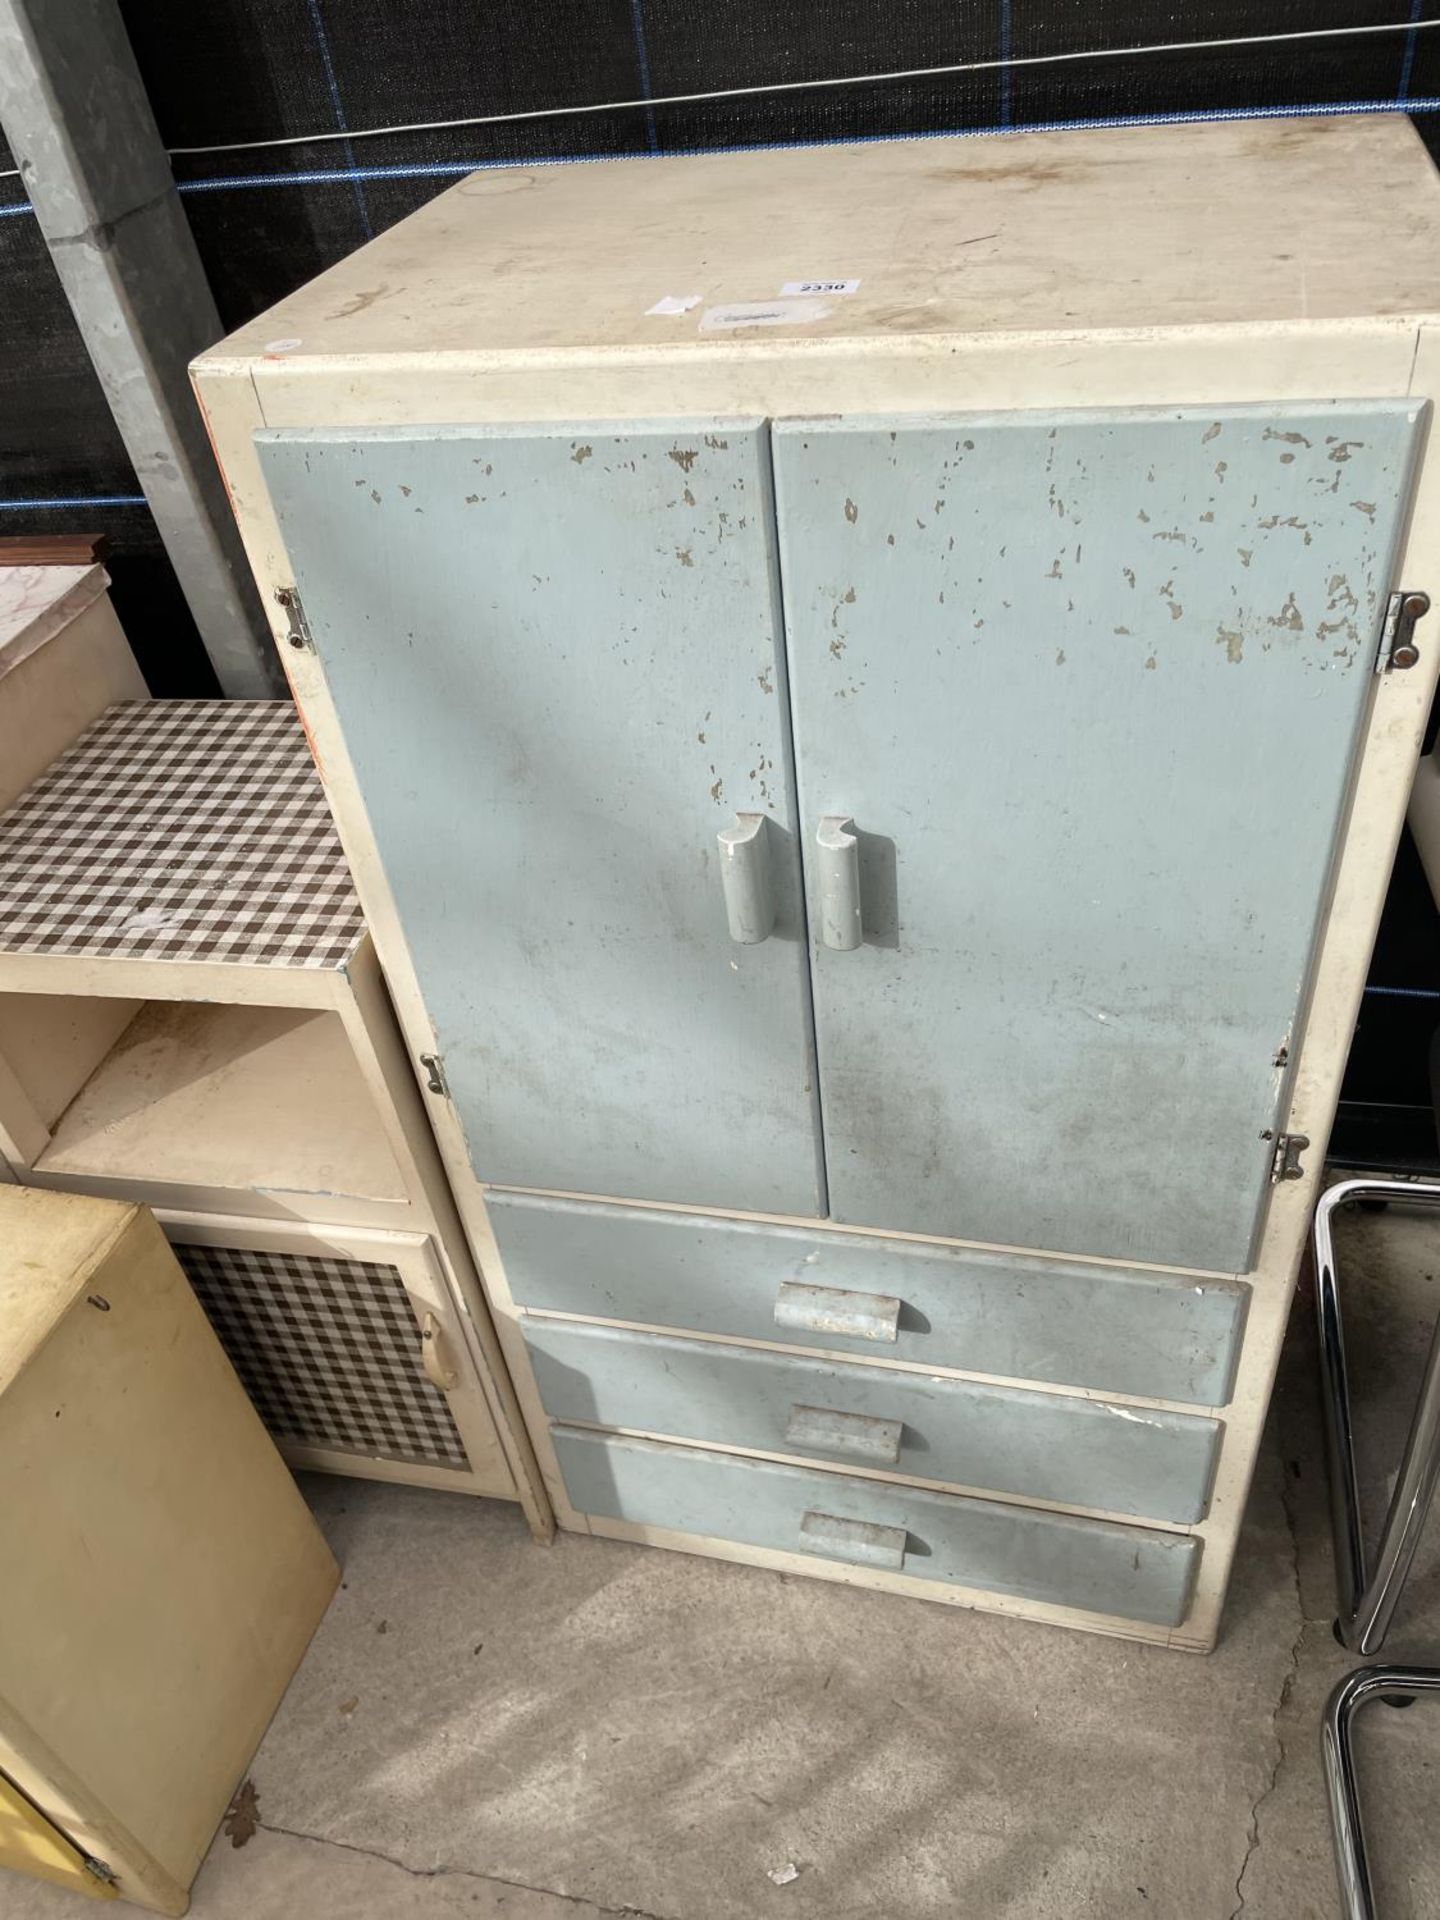 A RETRO KITCHEN CABINET WITH TWO DOORS AND THREE DRAWERS